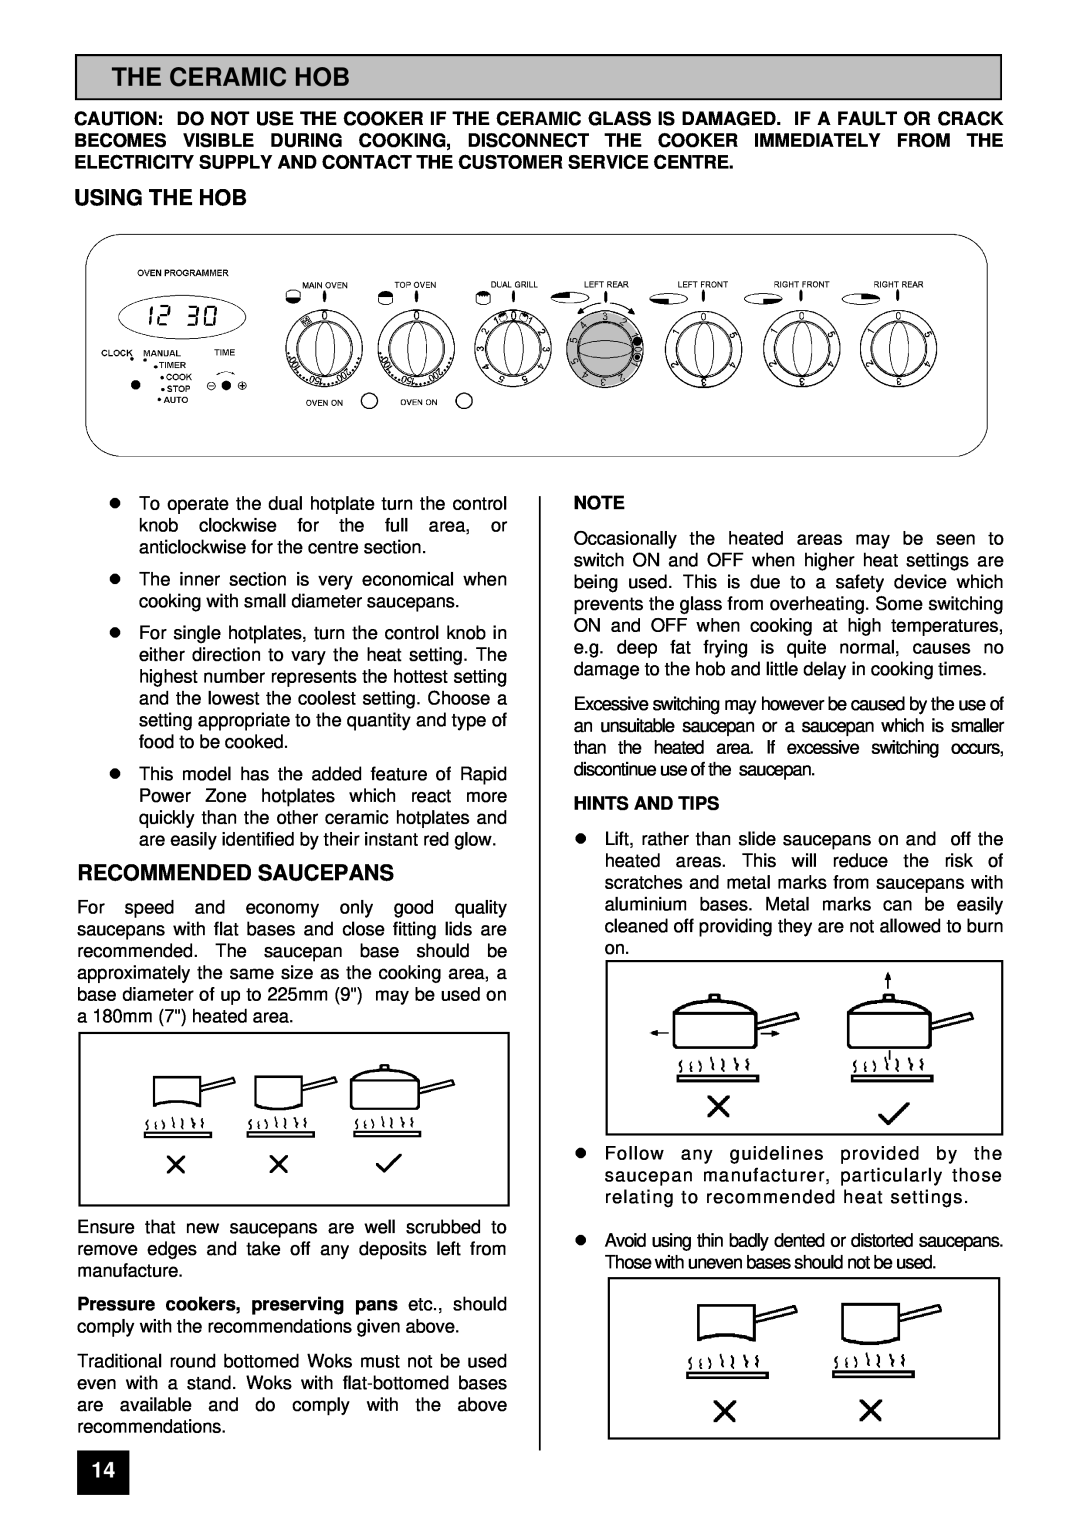 Tricity Bendix SIE 530 installation instructions The Ceramic Hob, Using The Hob, Recommended Saucepans, lHINTS AND TIPS 